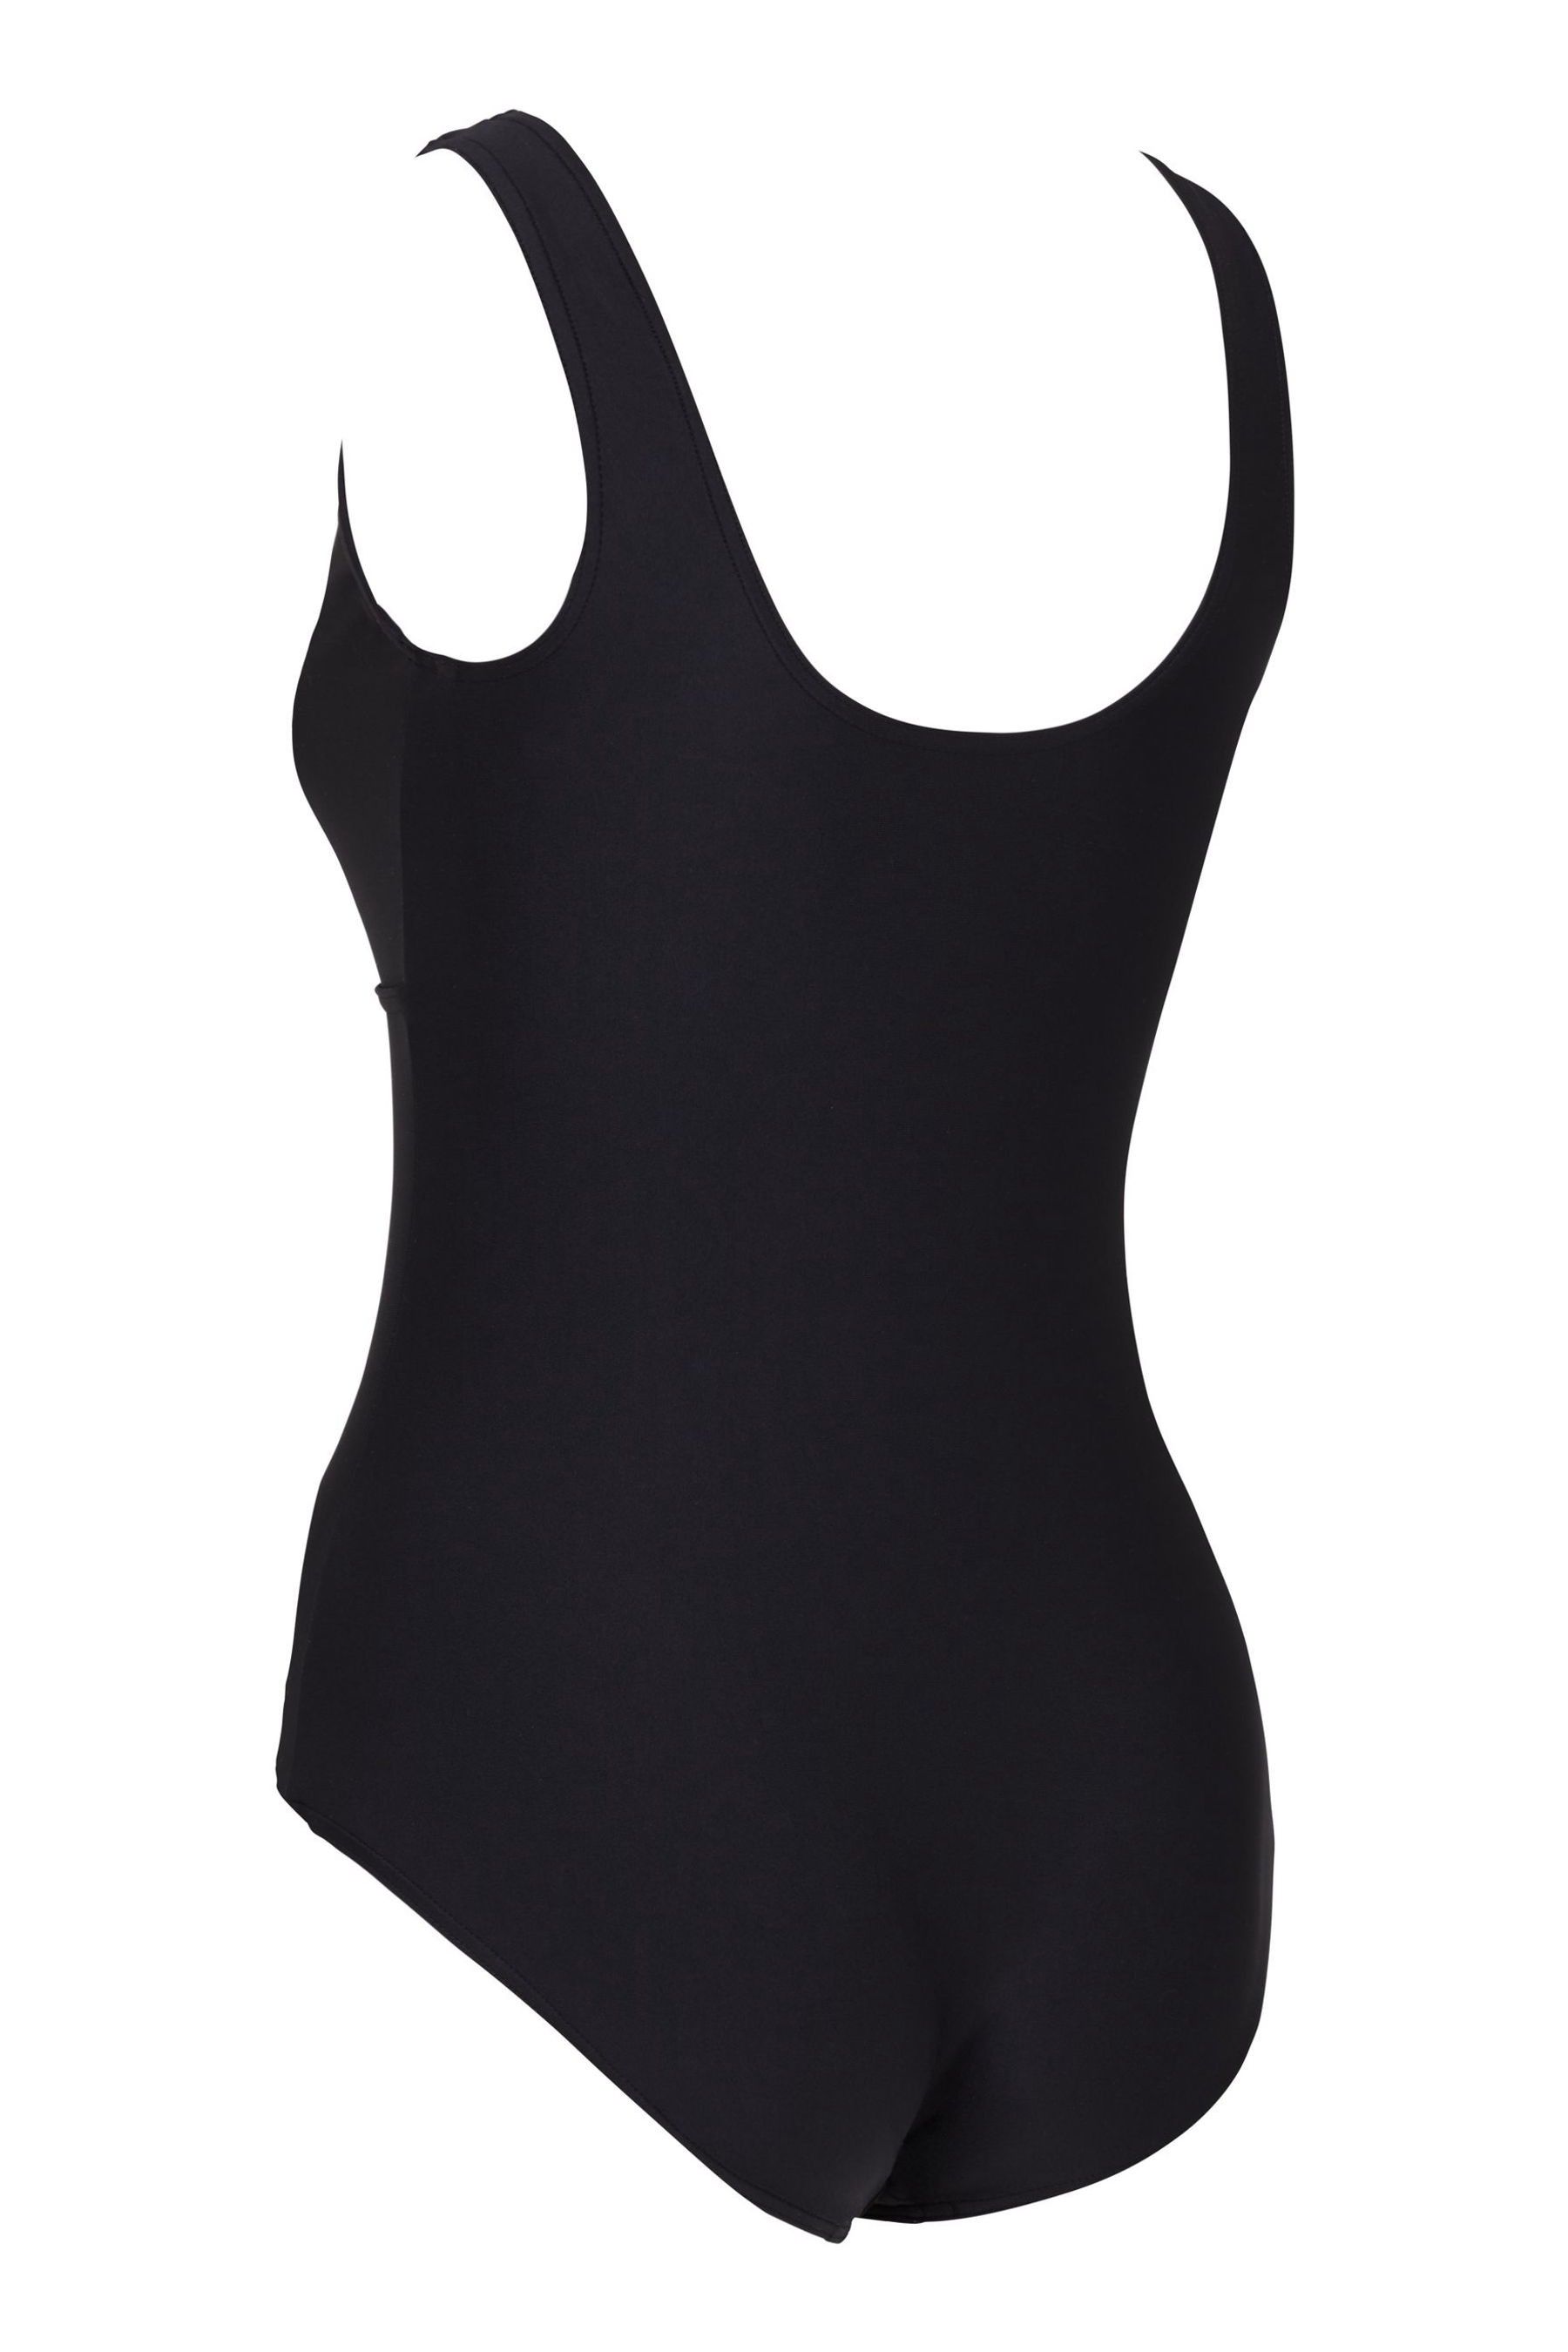 Buy Zoggs Black Marley Scoopback One Piece Swimsuit from the Next UK ...